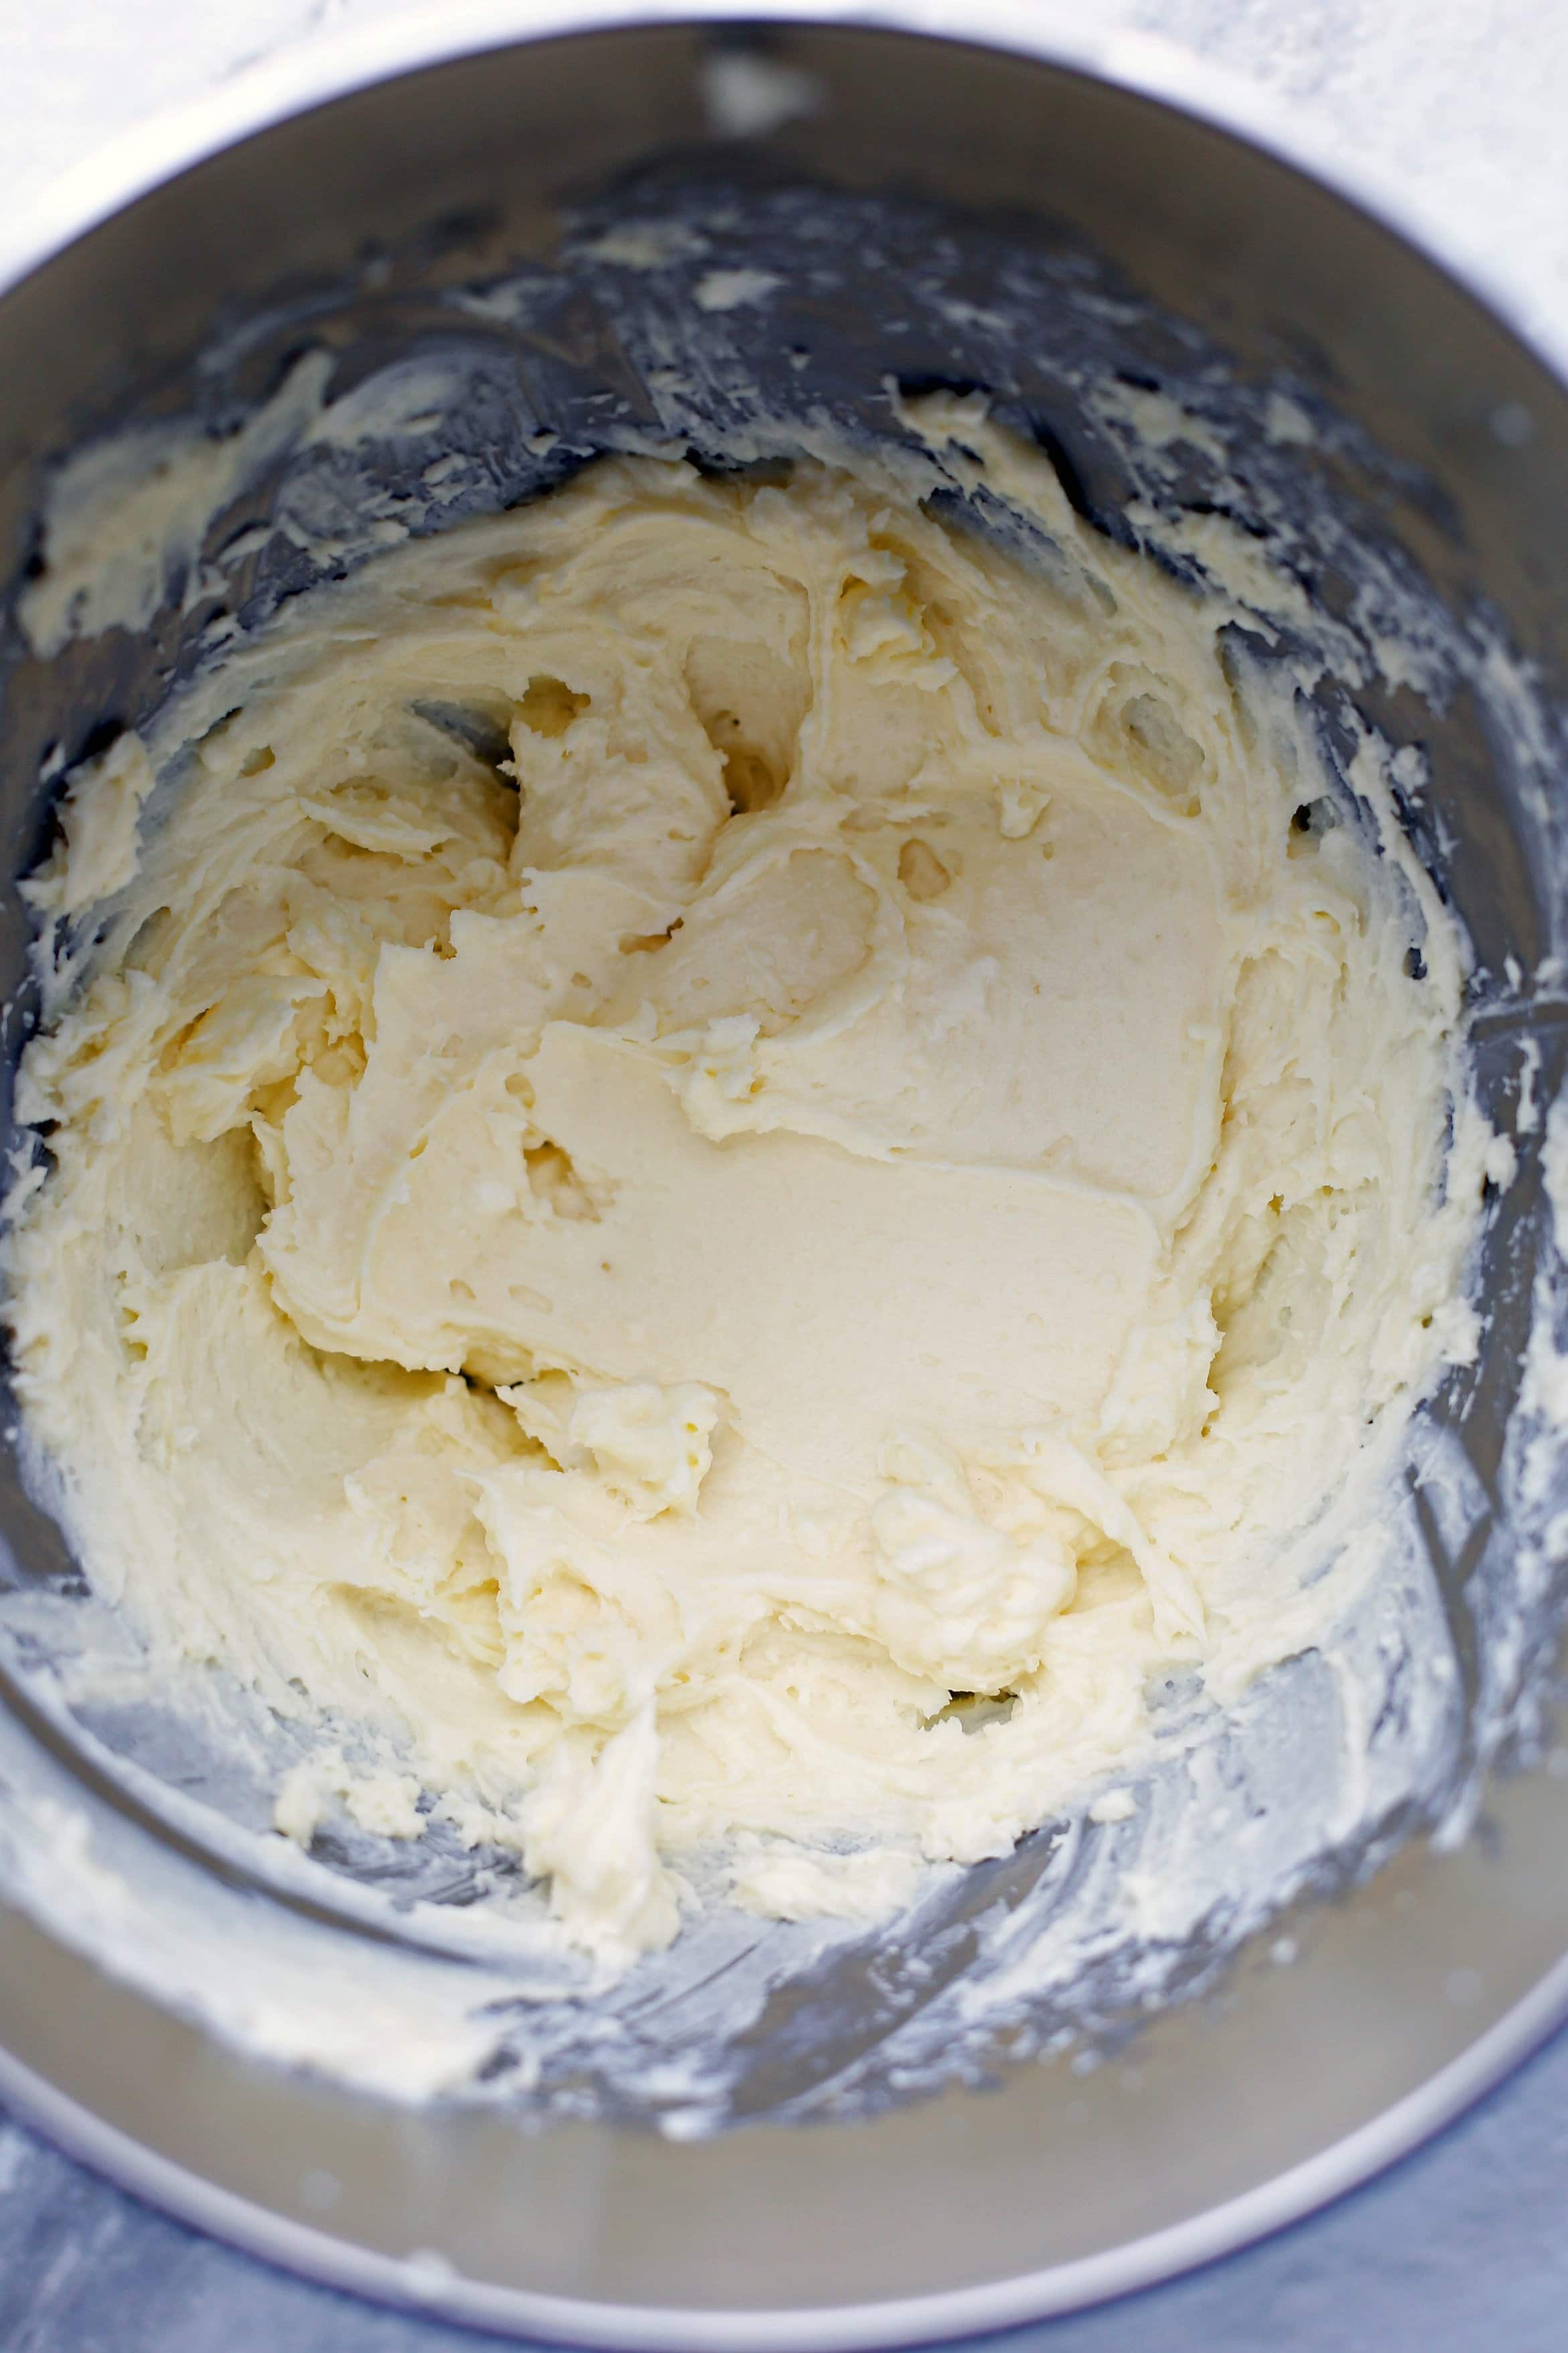 Butter, cream cheese, sugar, vanilla extract, and an egg combined in a large metal mixing bowl.